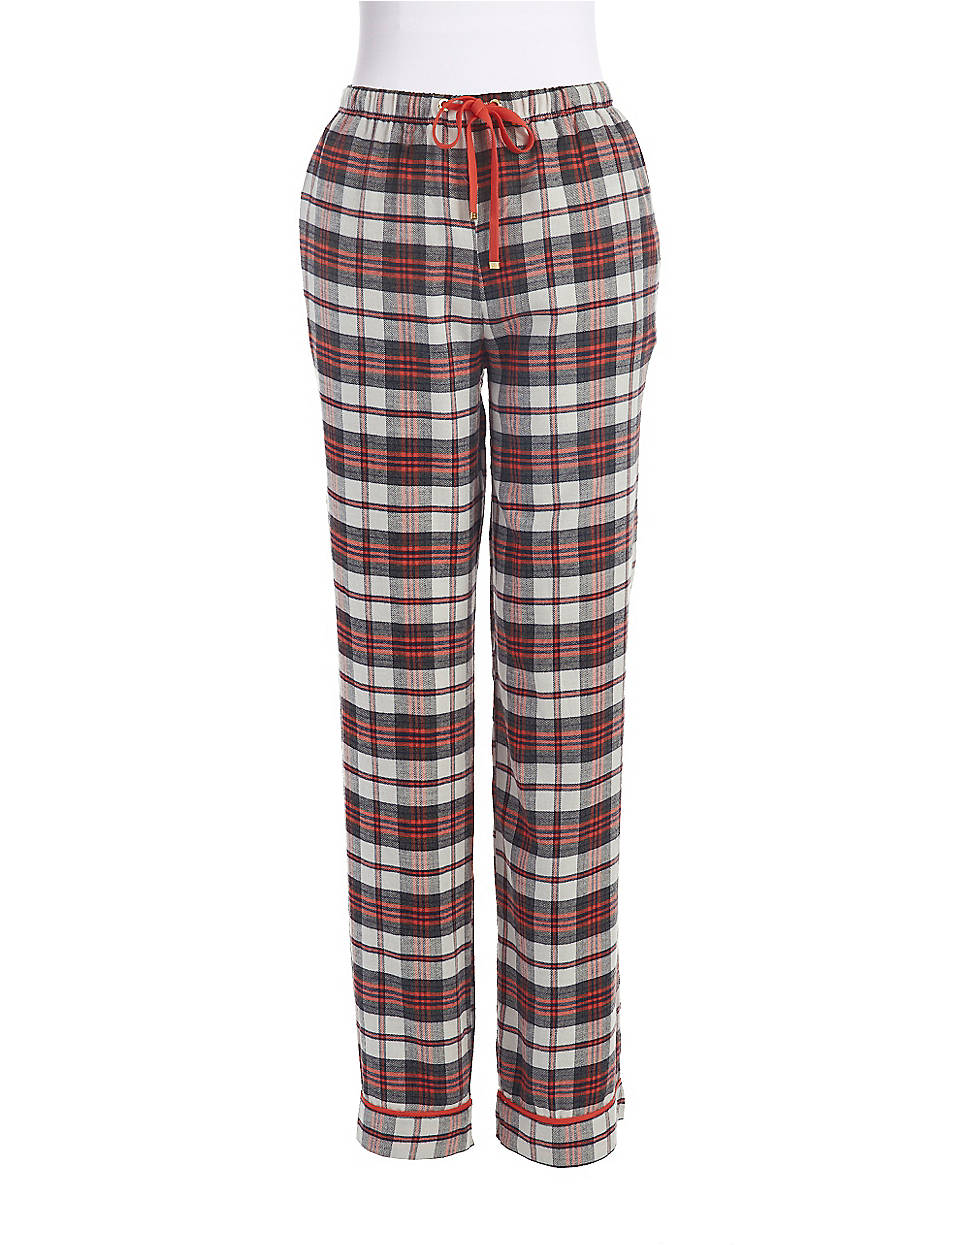 Dkny Plaid Pajama Pants in Red | Lyst